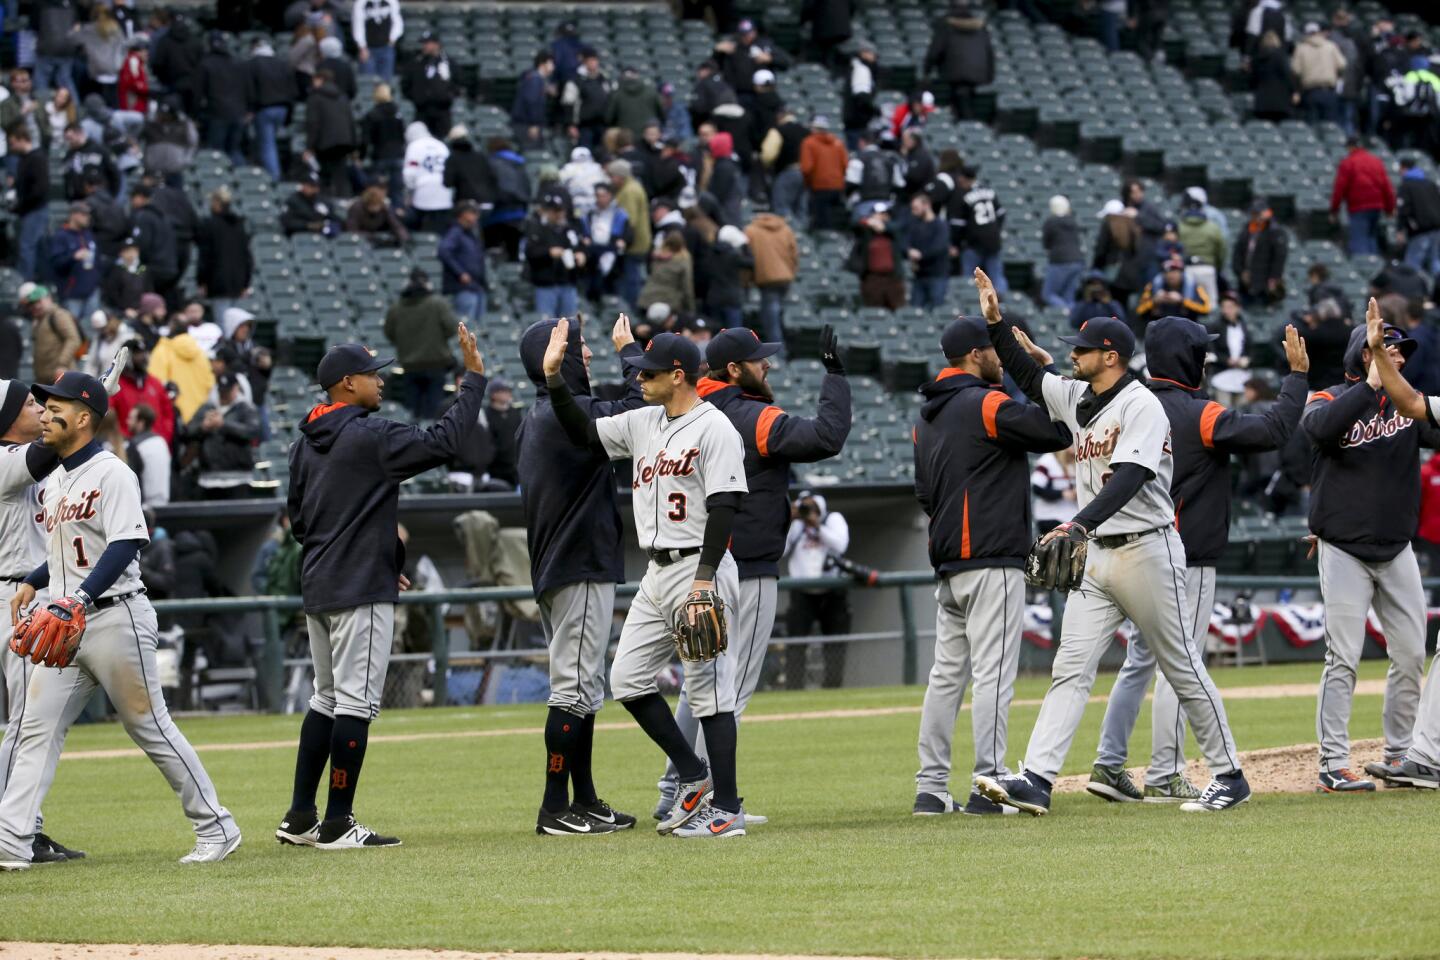 Detroit Tigers players celebrate after defeating the White Sox 6-3 on opening day at Guaranteed Rate Field.